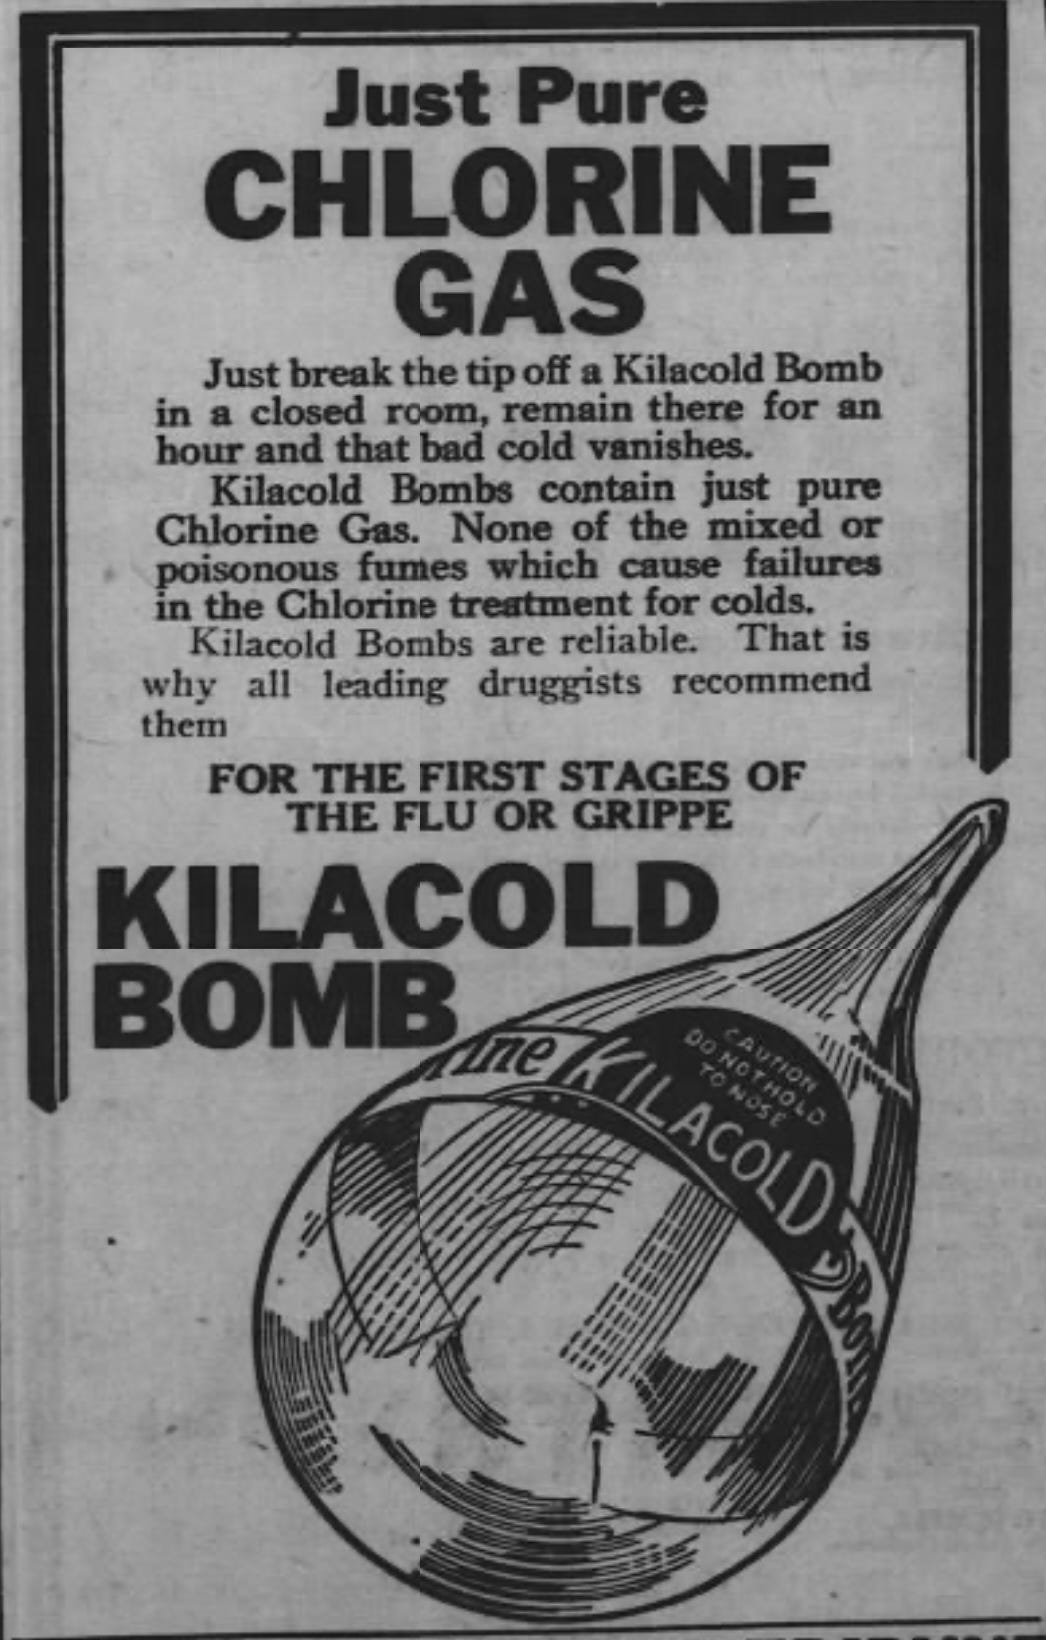 A newspaper advertisement with the headline 'Just Pure Chlorine Gas' and an explanation of how to use the Kilacold Bomb. There is also a drawing of the 'bomb' itself.